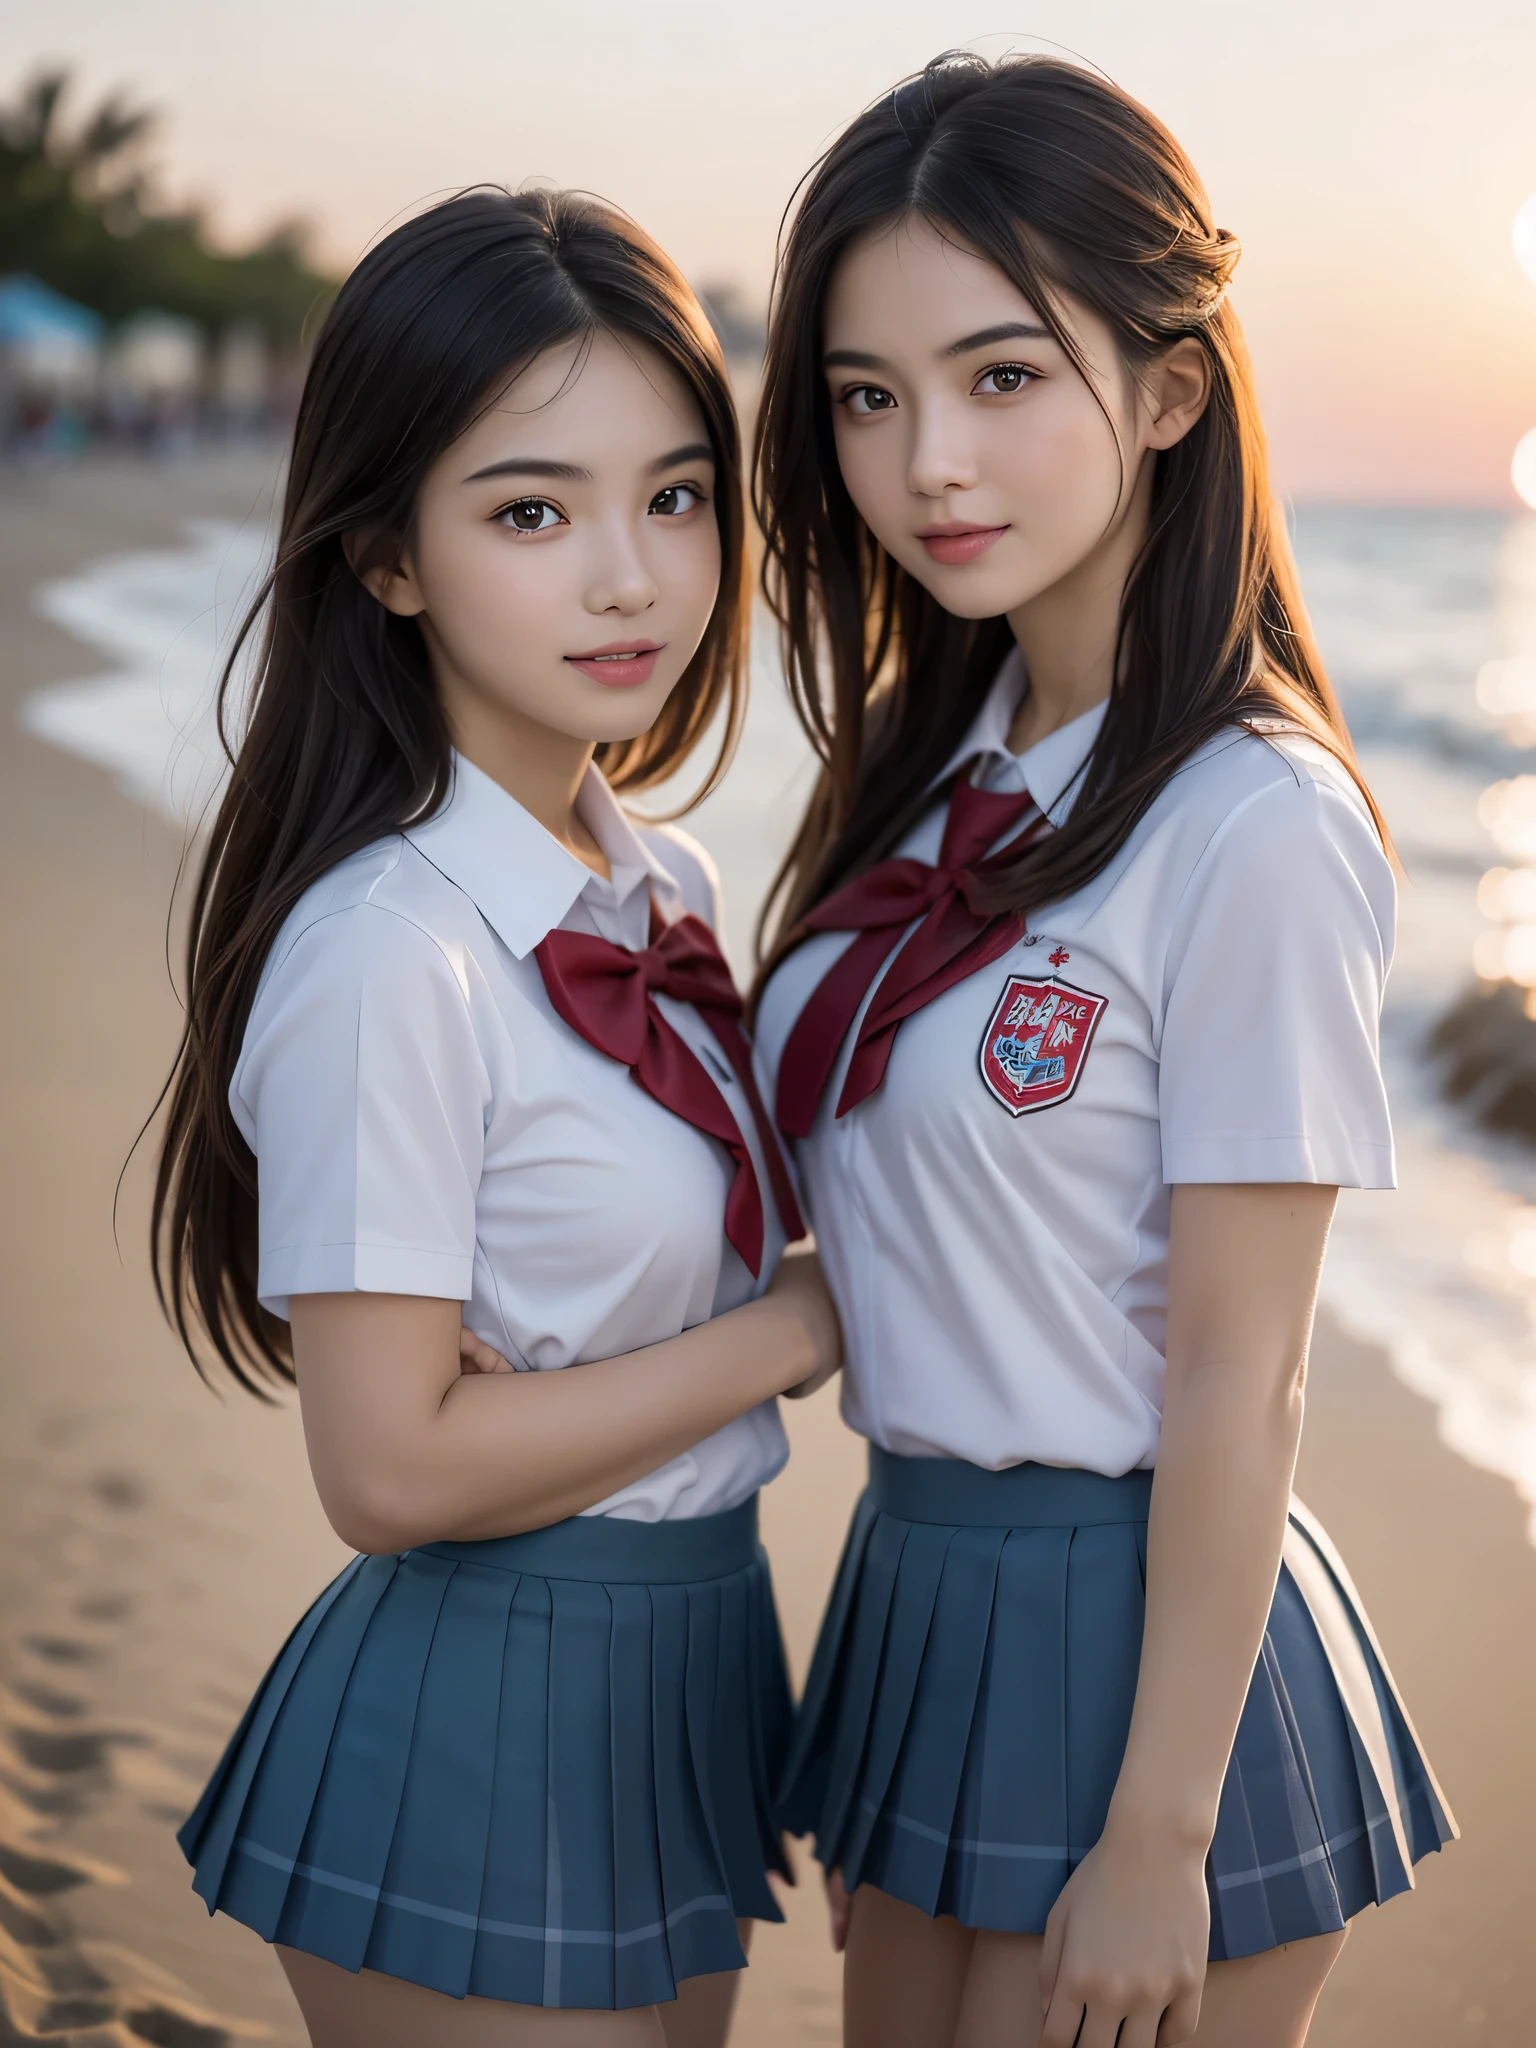 (2girls:1.3), (extremely detailed beautiful face), Amazing face and eyes, (Best Quality:1.4), (Ultra-detailed), (extremely detailed CG unified 8k wallpaper), Highly detailed, High-definition raw color photos, Professional Photography, Realistic portrait, Amazing face and eyes, Pink eyes, (High , Pleated mini-skirt:1.3), double buns, Brown hair, Model, shyly smile, depth of fields, Beach, Twilight, Sunset,